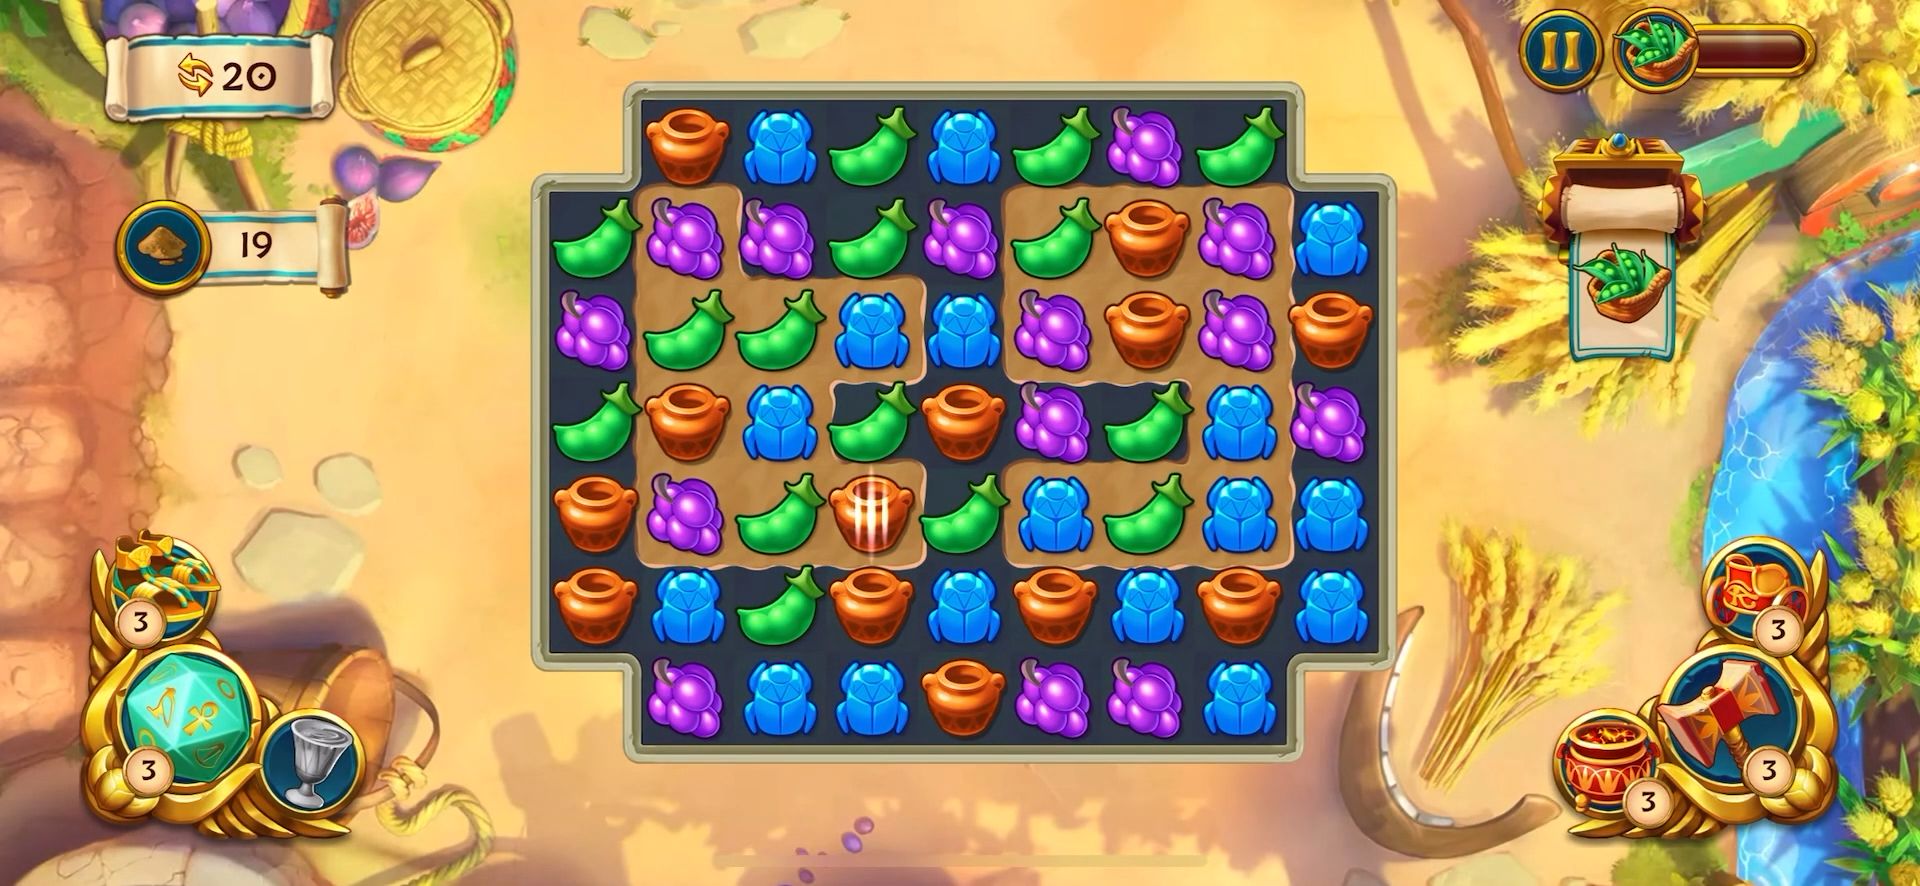 jewels of egypt: match-3 puzzle game